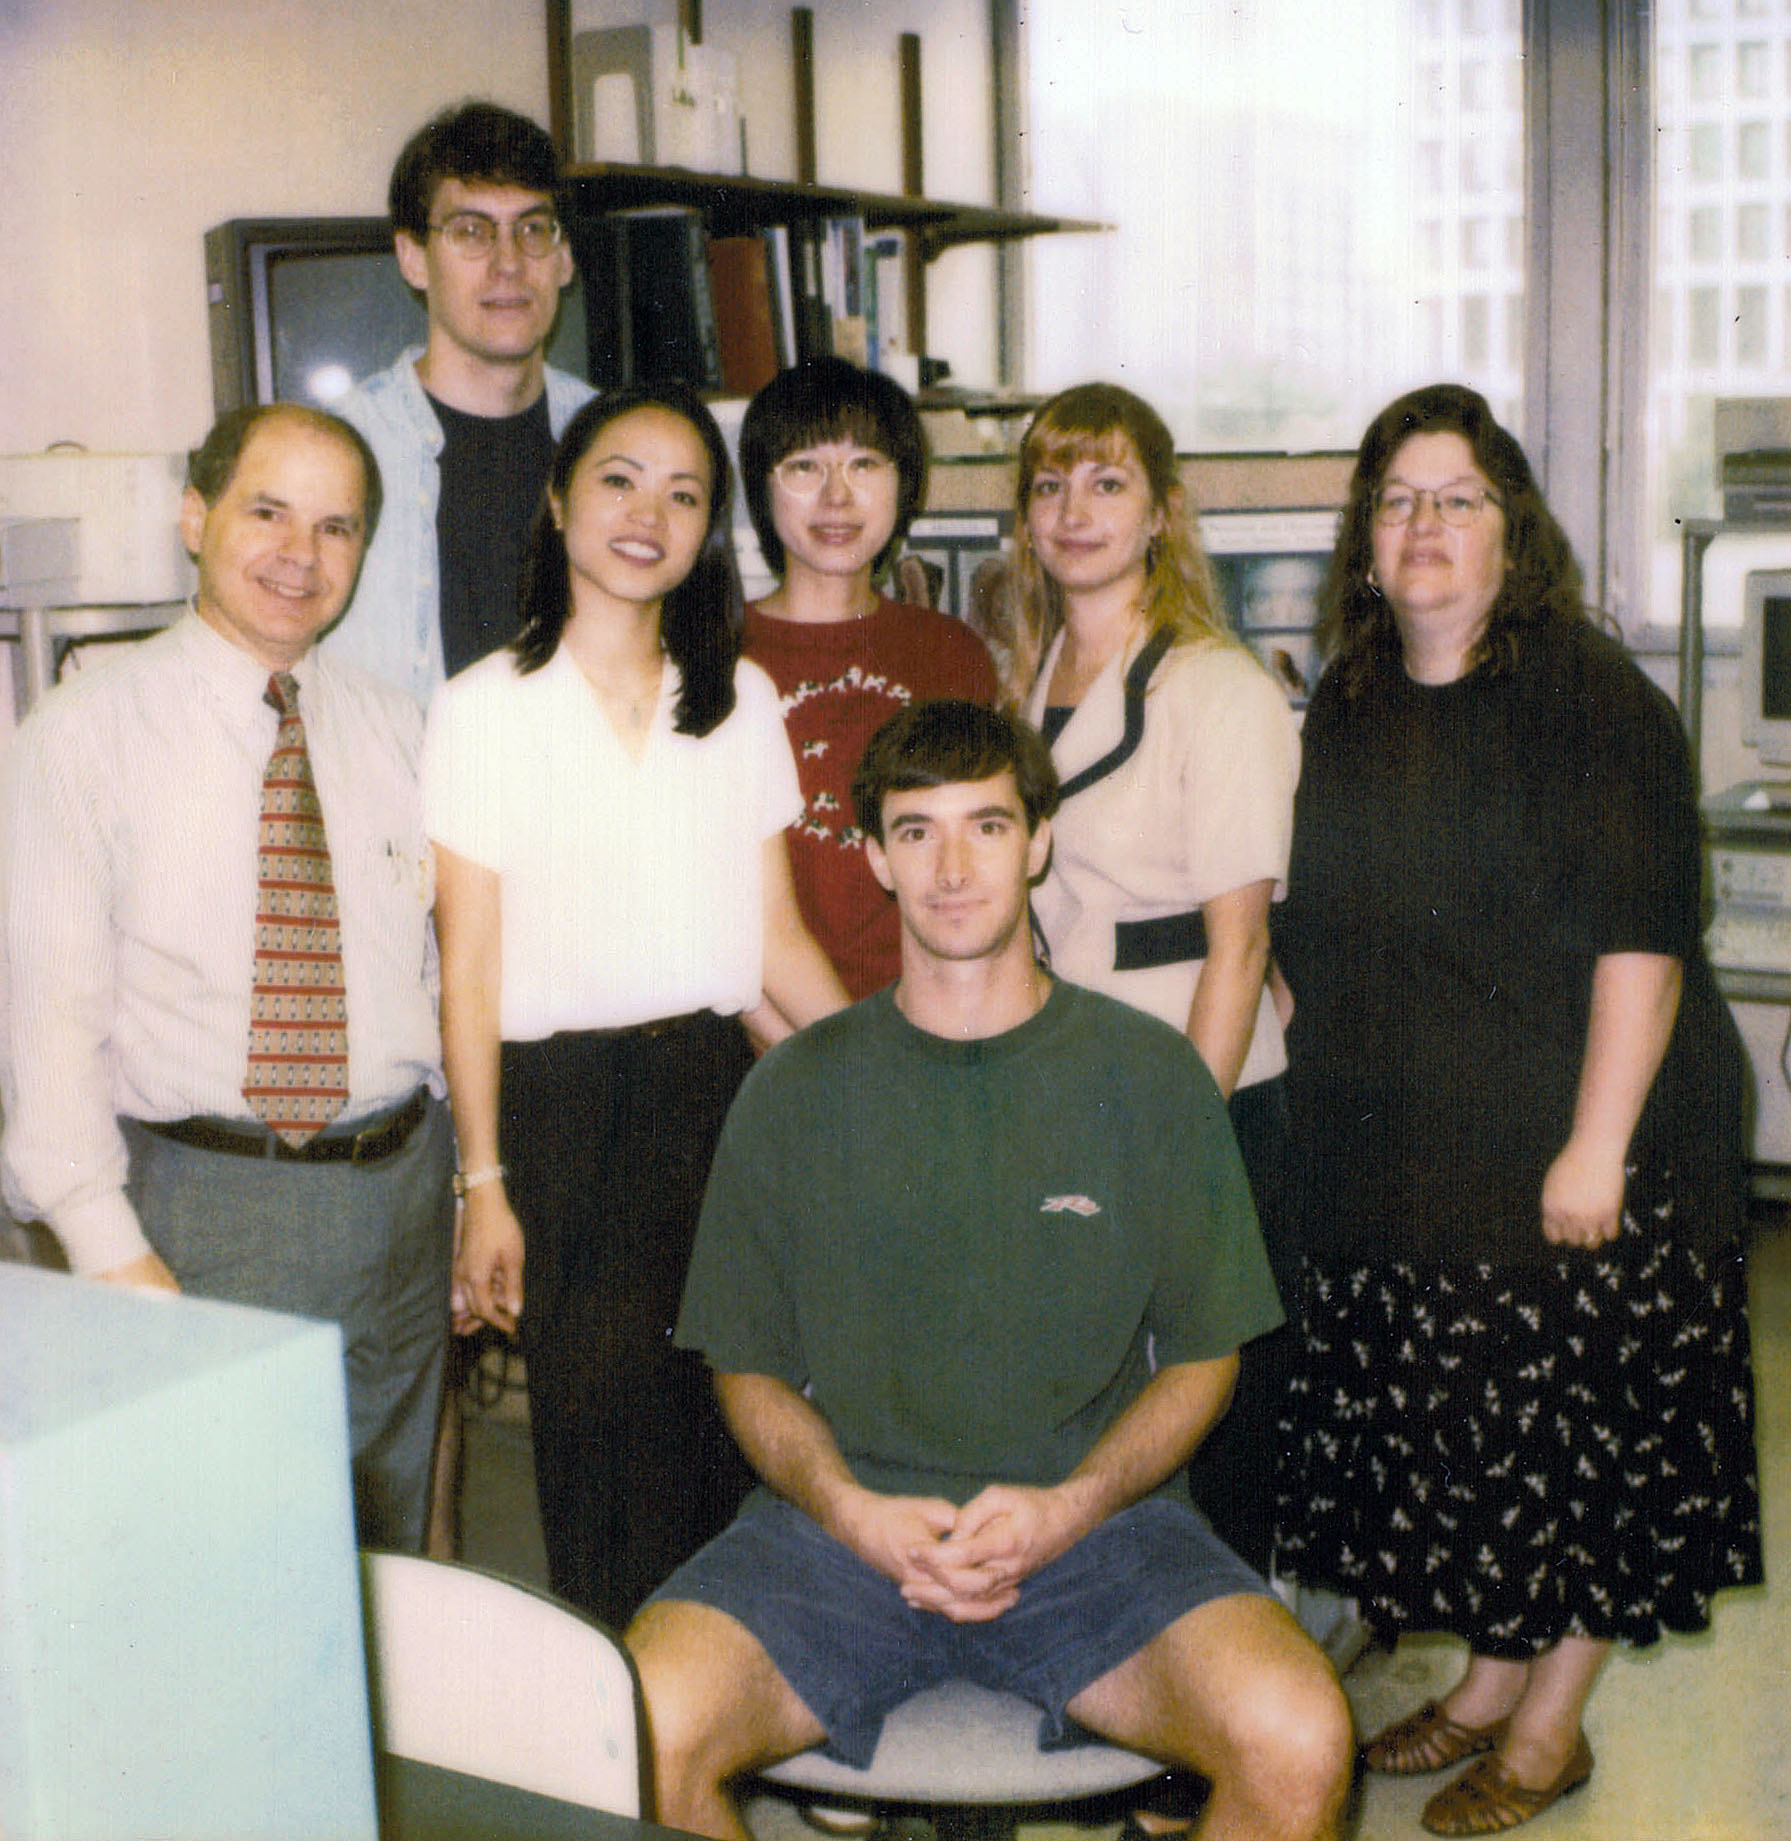 In this 1998 photo from the lab of Richard Costanzo, Ph.D., Mark Richardson, MS’99 (PHIS), MD-PhD’05, is seated in the front row with Eric Holbrook, M.D., H’00, standing in the back. The two reunited at Harvard Medical School.